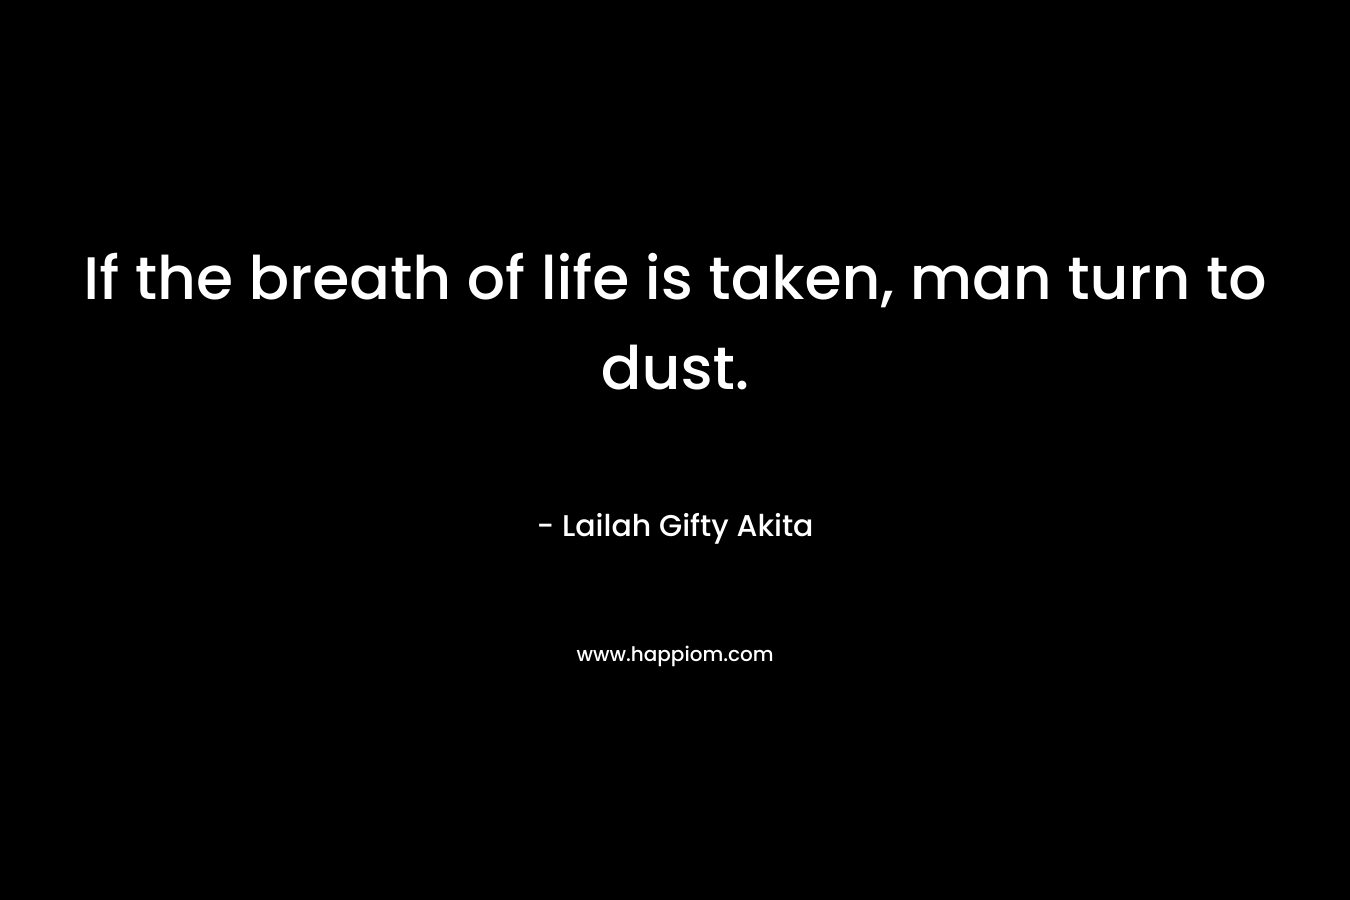 If the breath of life is taken, man turn to dust.